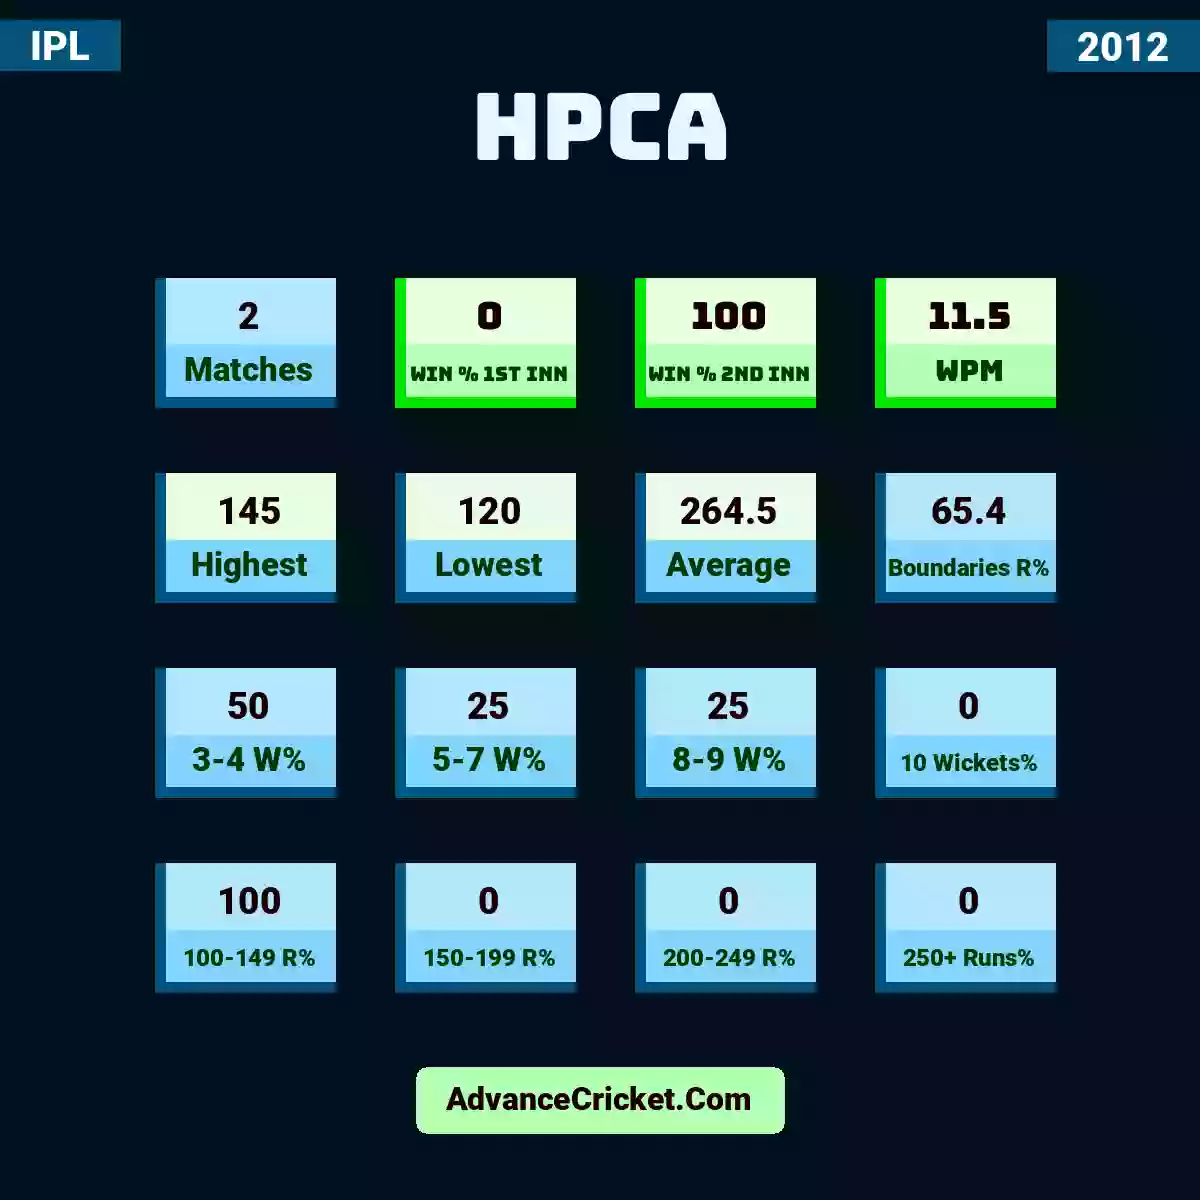 Image showing HPCA with Matches: 2, Win % 1st Inn: 0, Win % 2nd Inn: 100, WPM: 11.5, Highest: 145, Lowest: 120, Average: 264.5, Boundaries R%: 65.4, 3-4 W%: 50, 5-7 W%: 25, 8-9 W%: 25, 10 Wickets%: 0, 100-149 R%: 100, 150-199 R%: 0, 200-249 R%: 0, 250+ Runs%: 0.